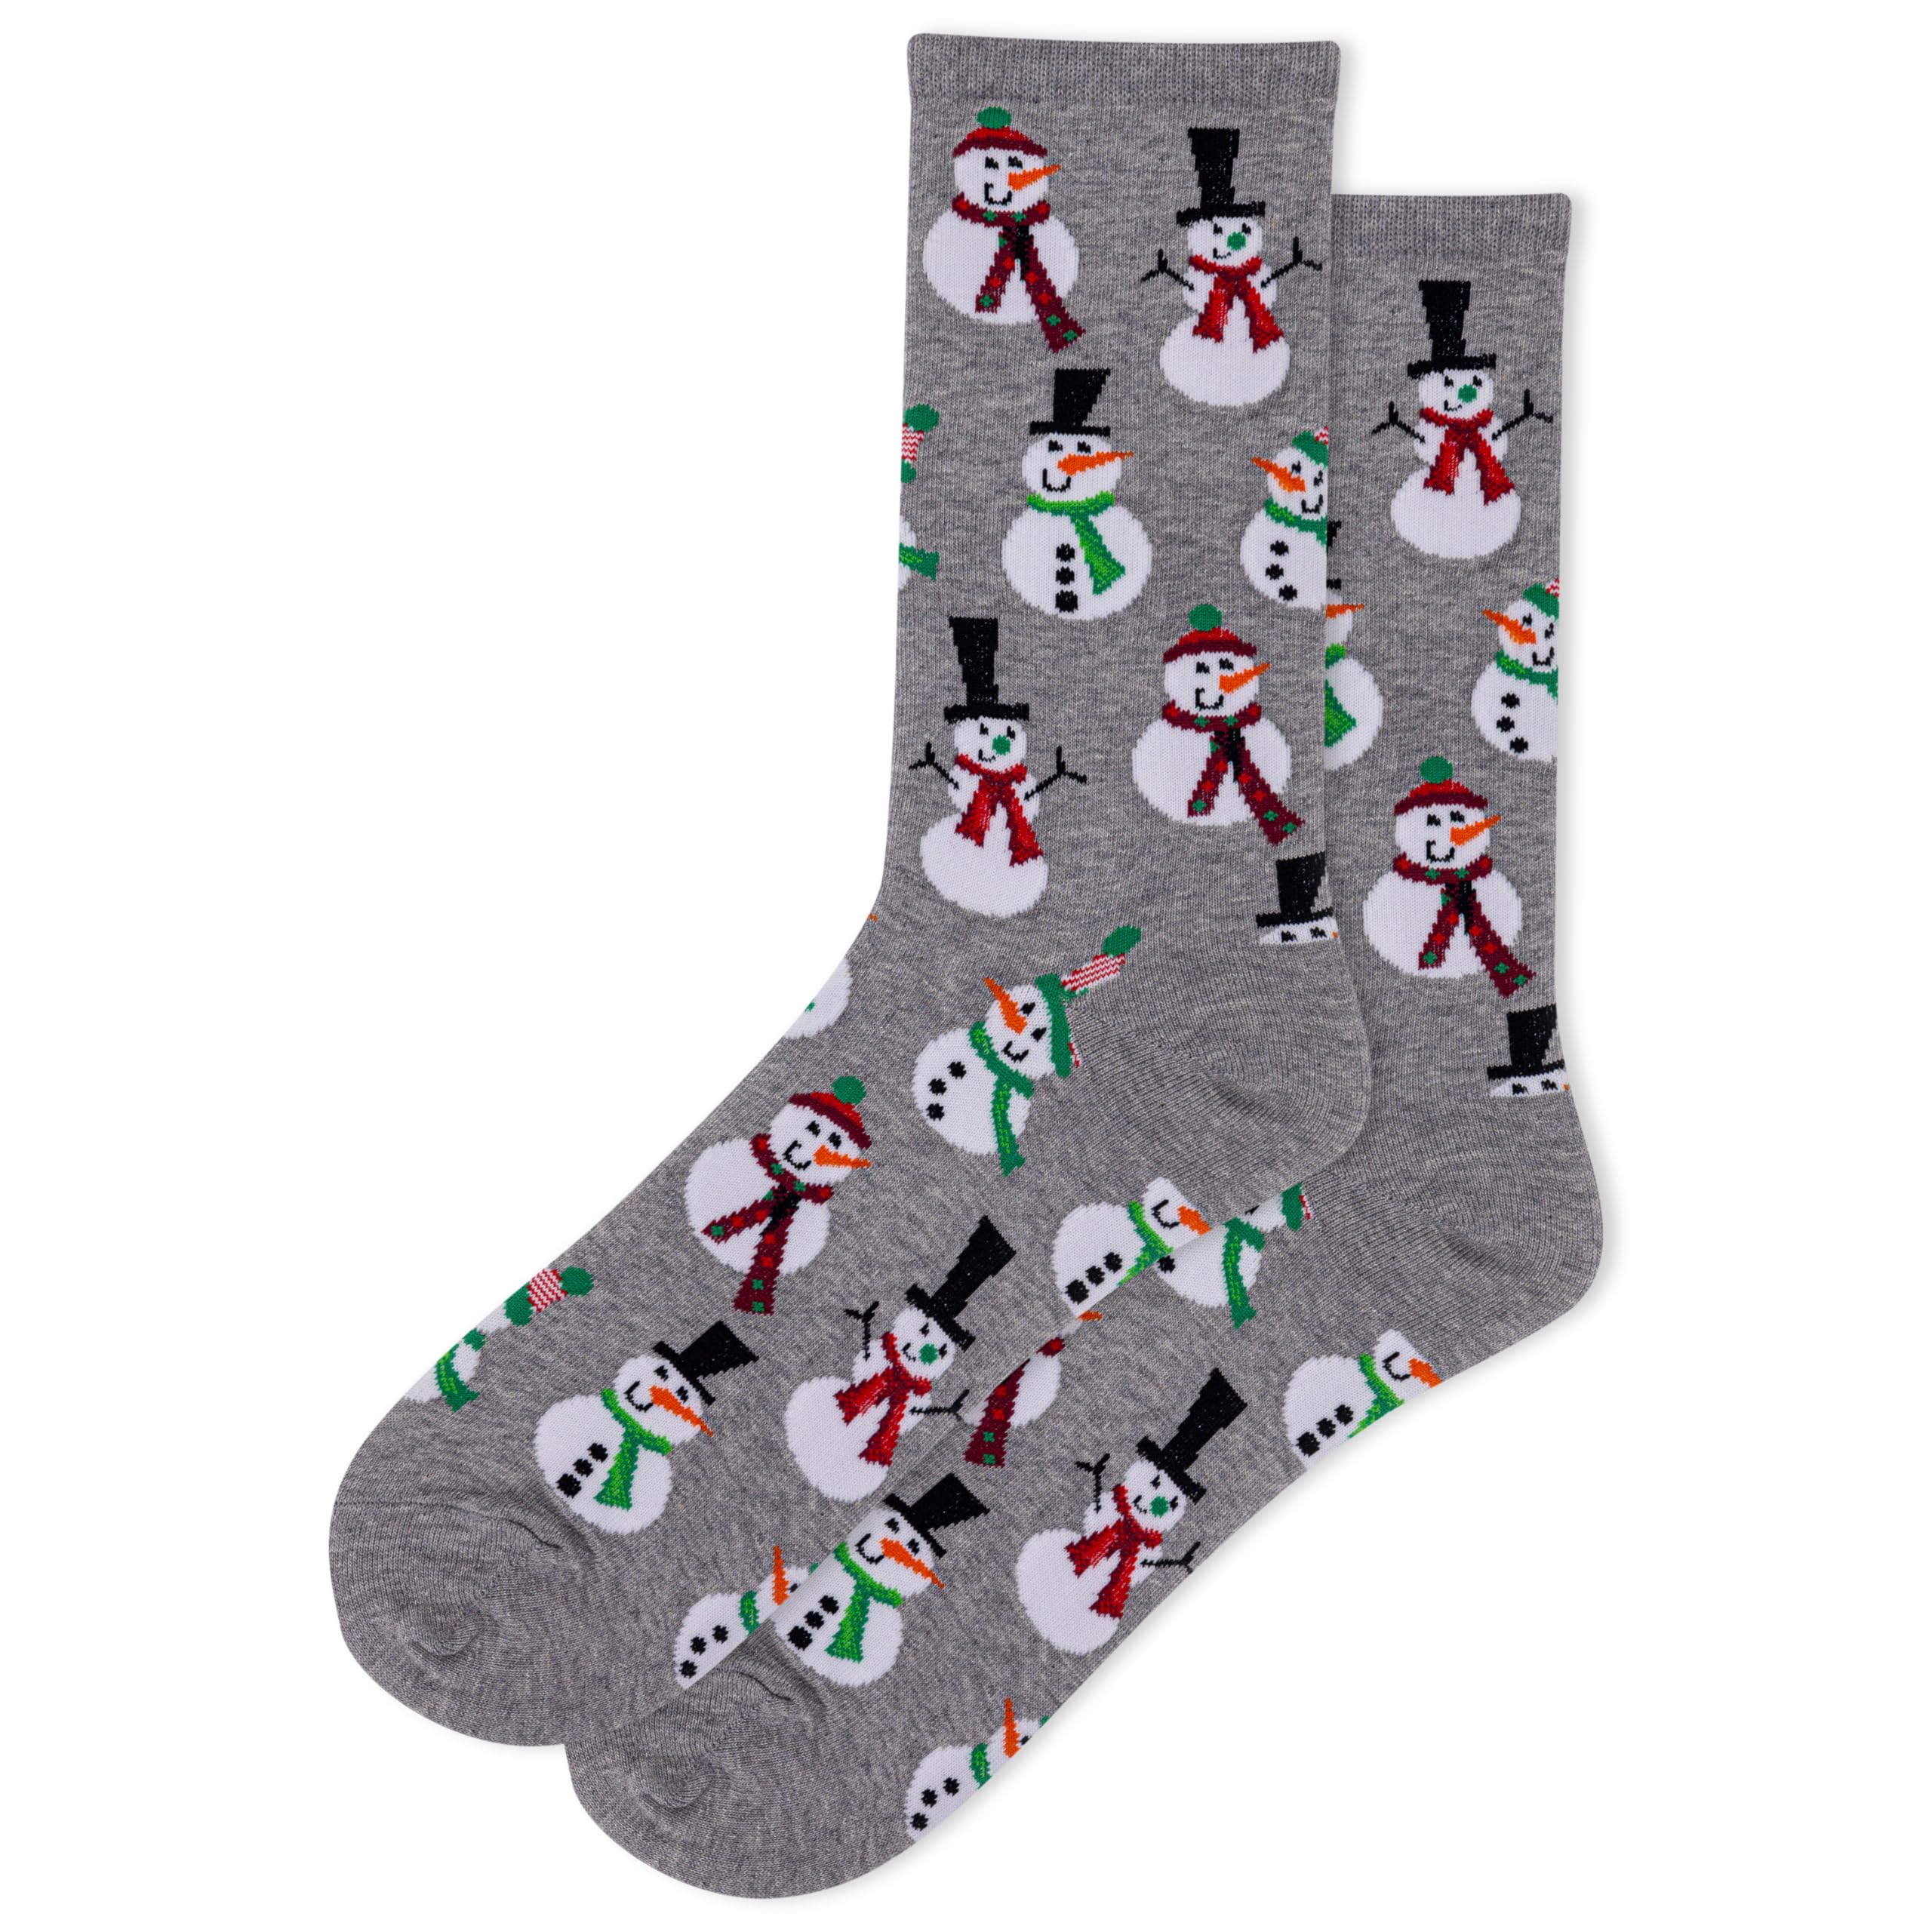 Hot Sox Women's Winter Holiday Fun Crew Socks-1 Pair Pack-Cute Gifts-Christmas & More